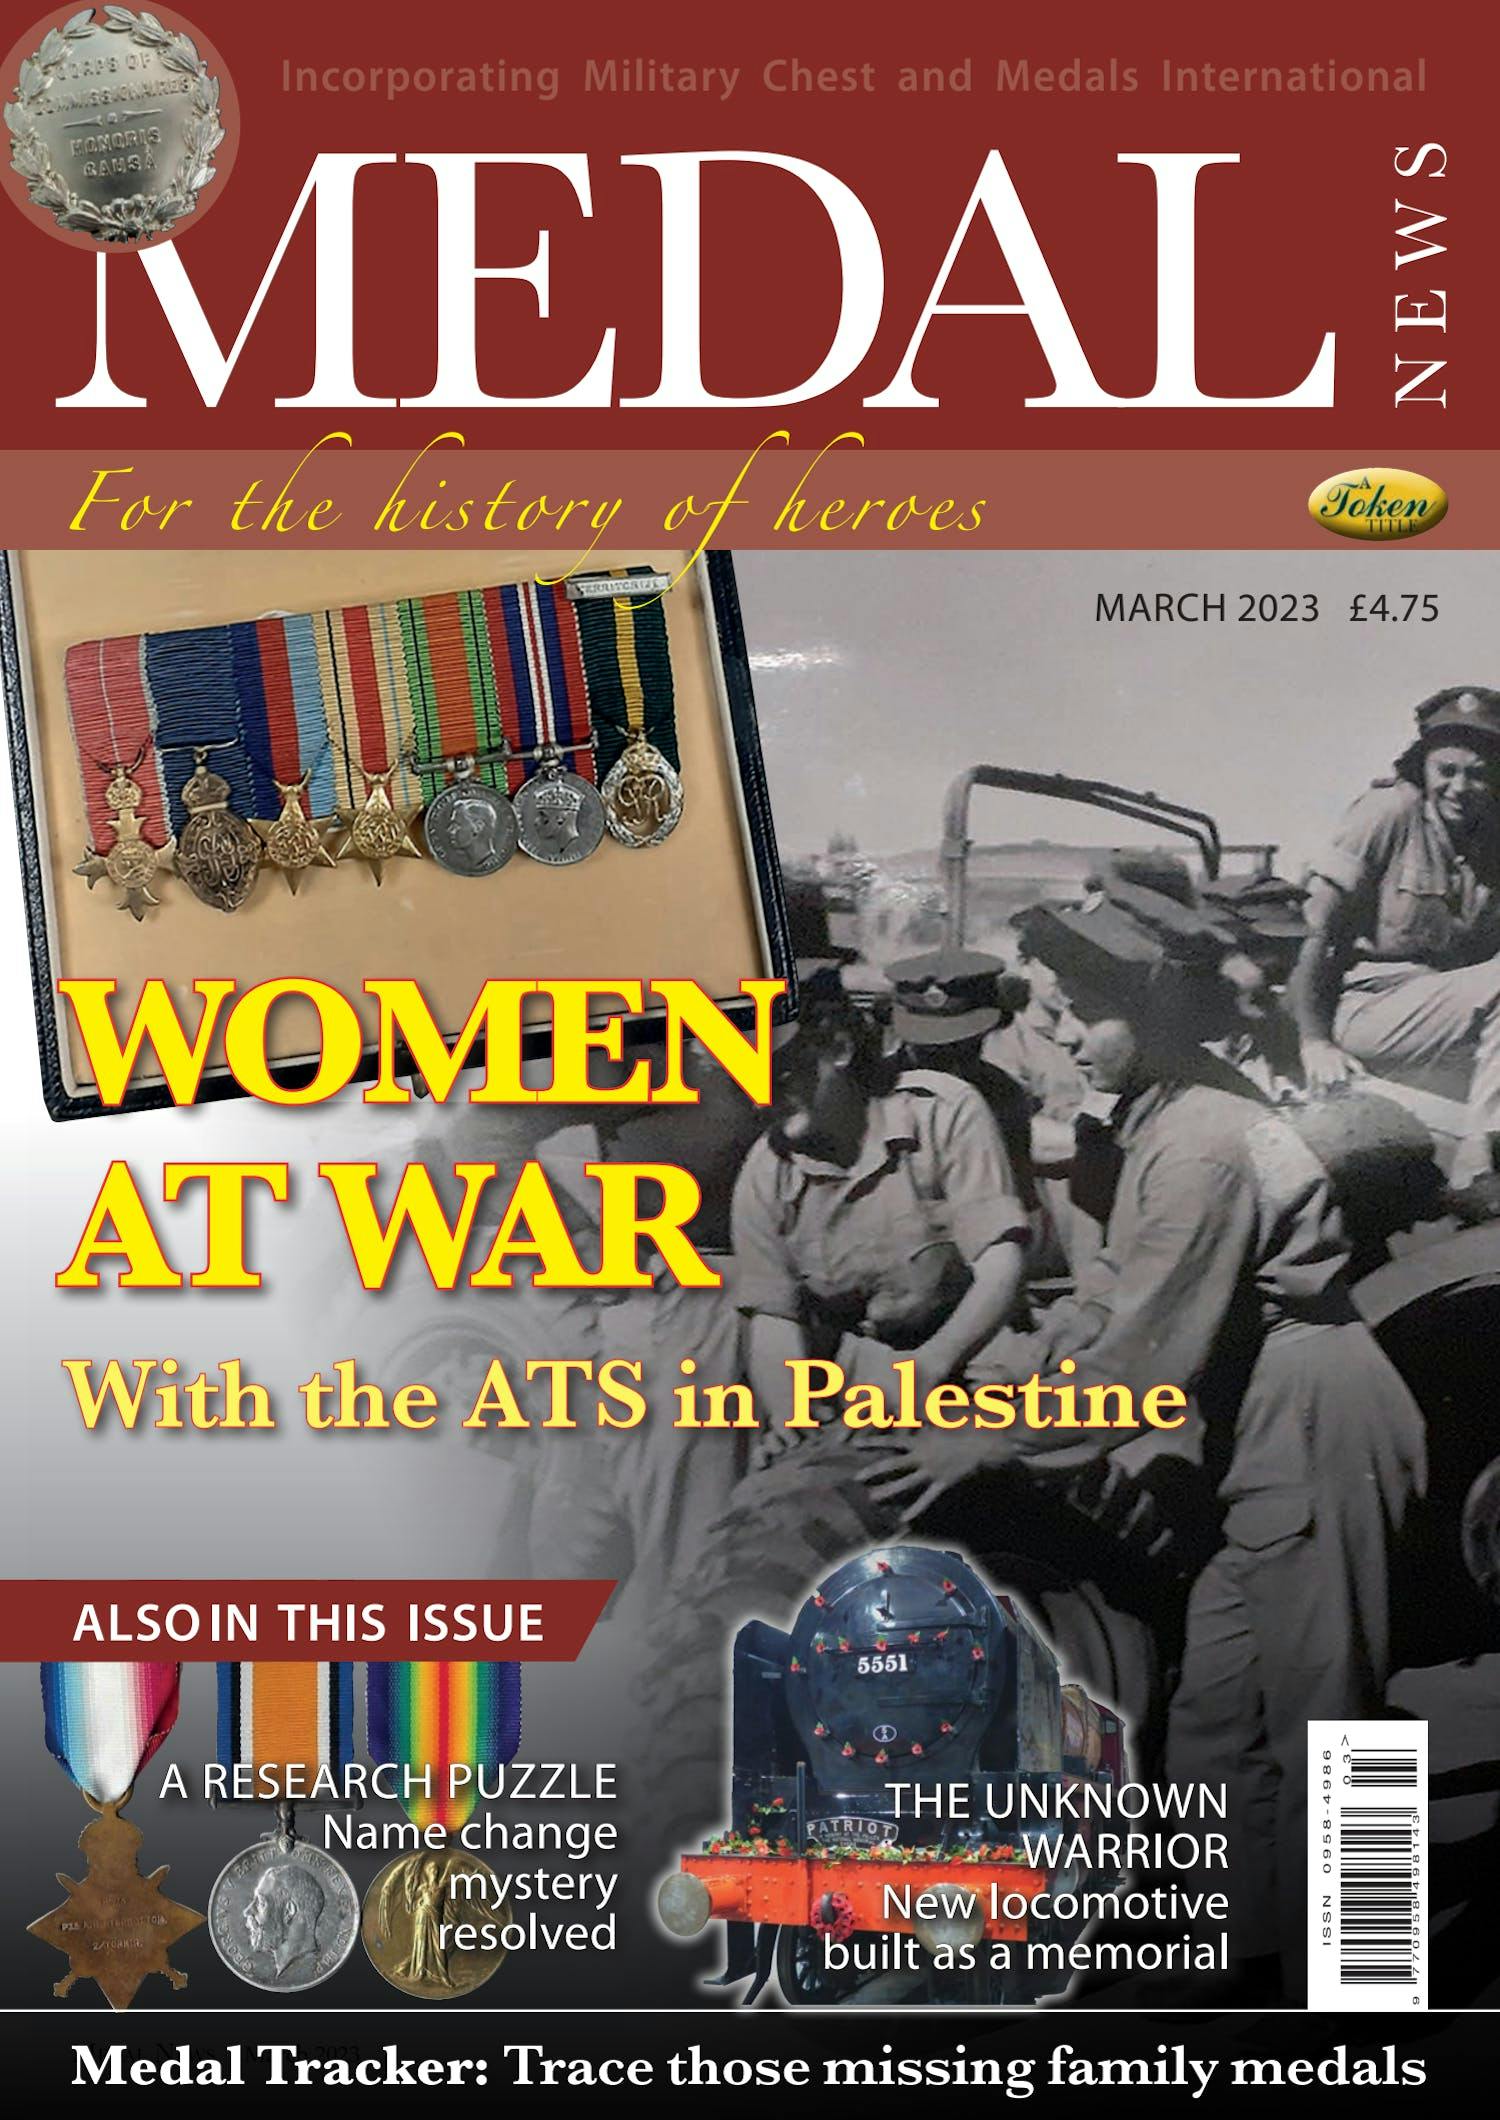 The front cover of Medal News, Volume 61, Number 3, March 2023